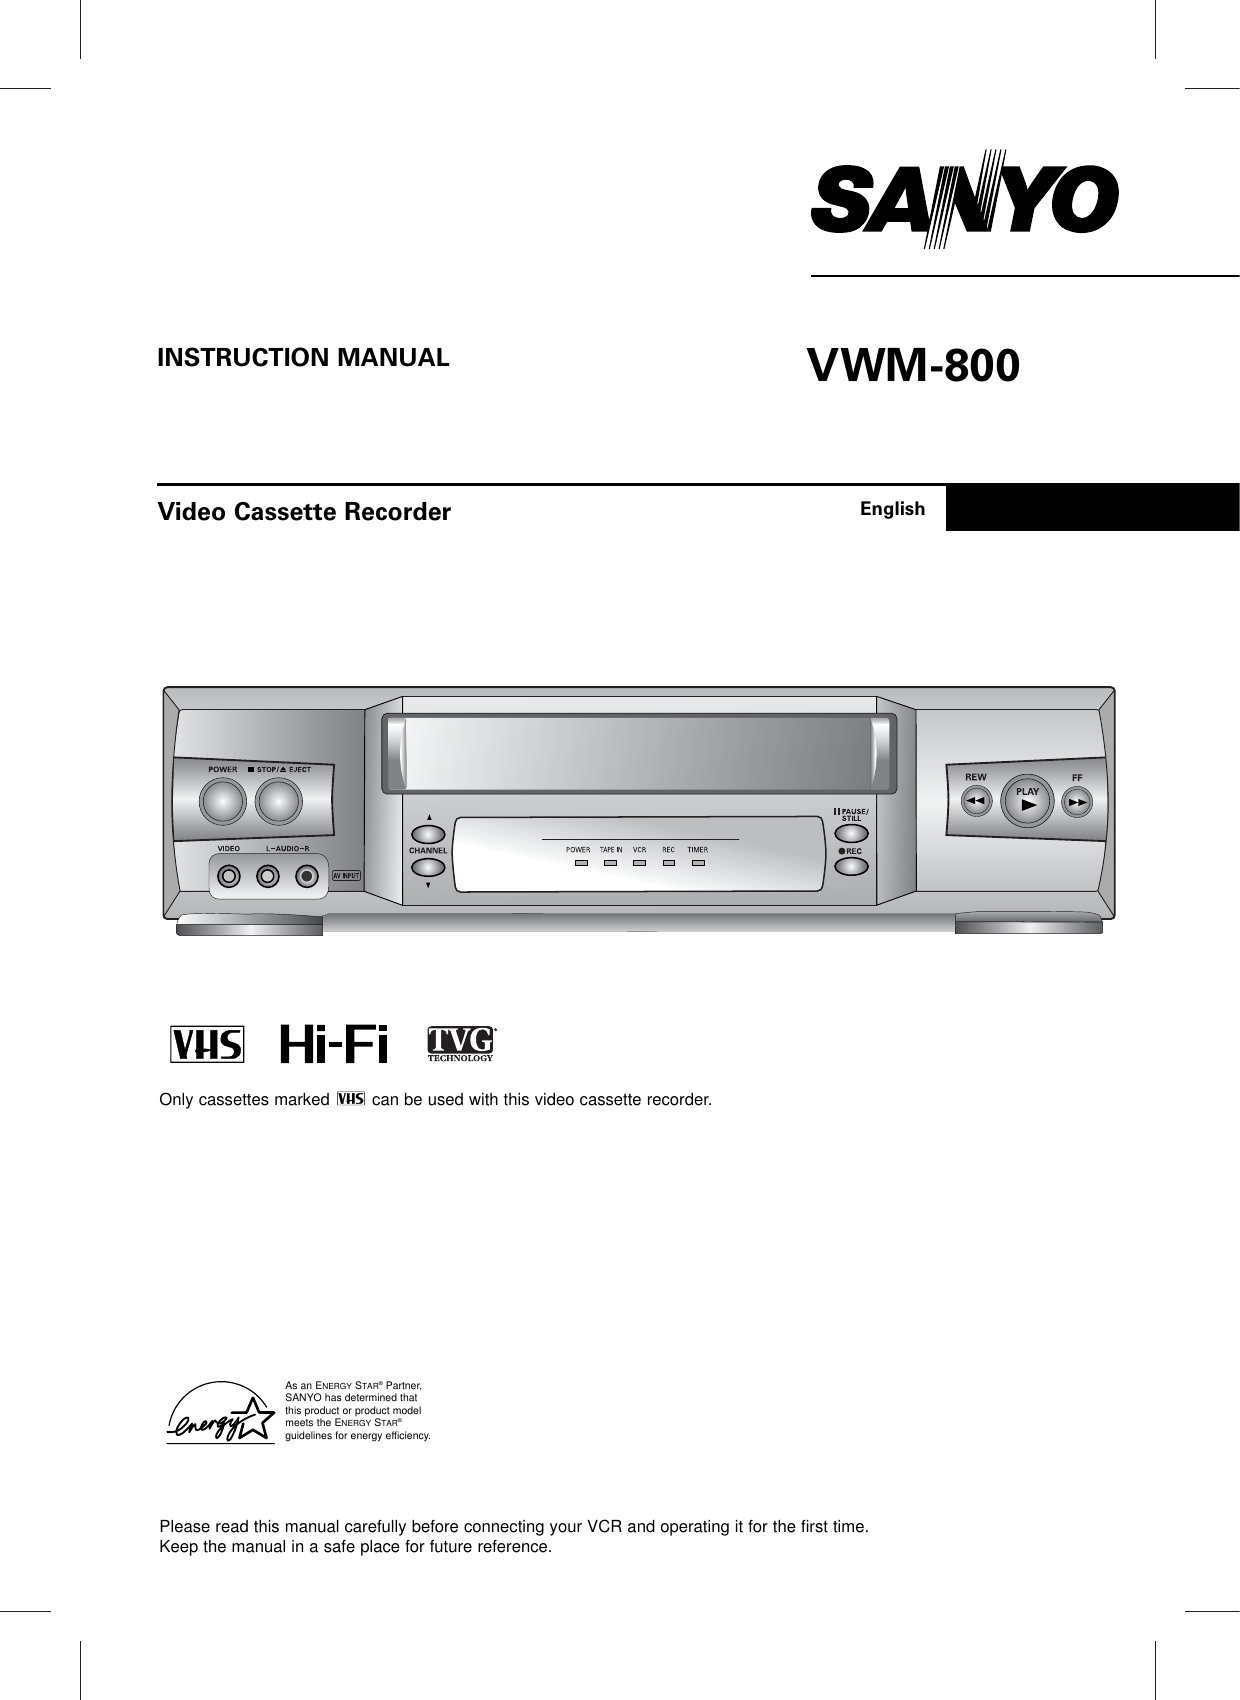 Please read this manual carefully before connecting your VCR and operating it for the first time.Keep the manual in a safe place for future reference.Only cassettes marked  can be used with this video cassette recorder.As an ENERGY STAR®Partner,SANYO has determined thatthis product or product modelmeets the ENERGY STAR®guidelines for energy efficiency.INSTRUCTION MANUAL VWM-800Video Cassette Recorder English